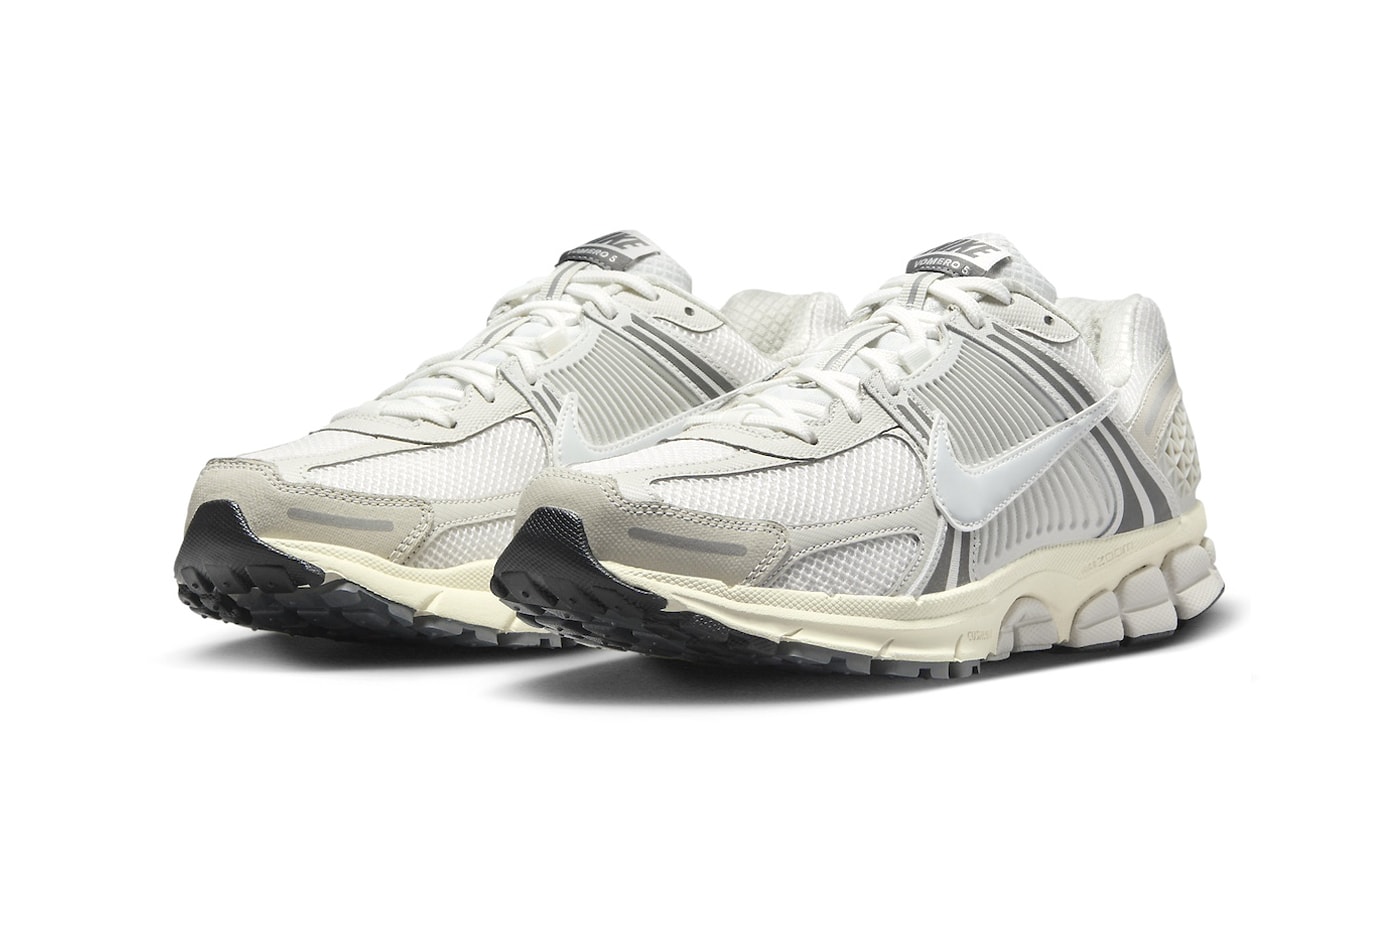 Nike Zoom Vomero 5 Surfaces in a Clean "Platinum Tint" HF0731-007 dad shoe sneaker comfortable everyday shoe